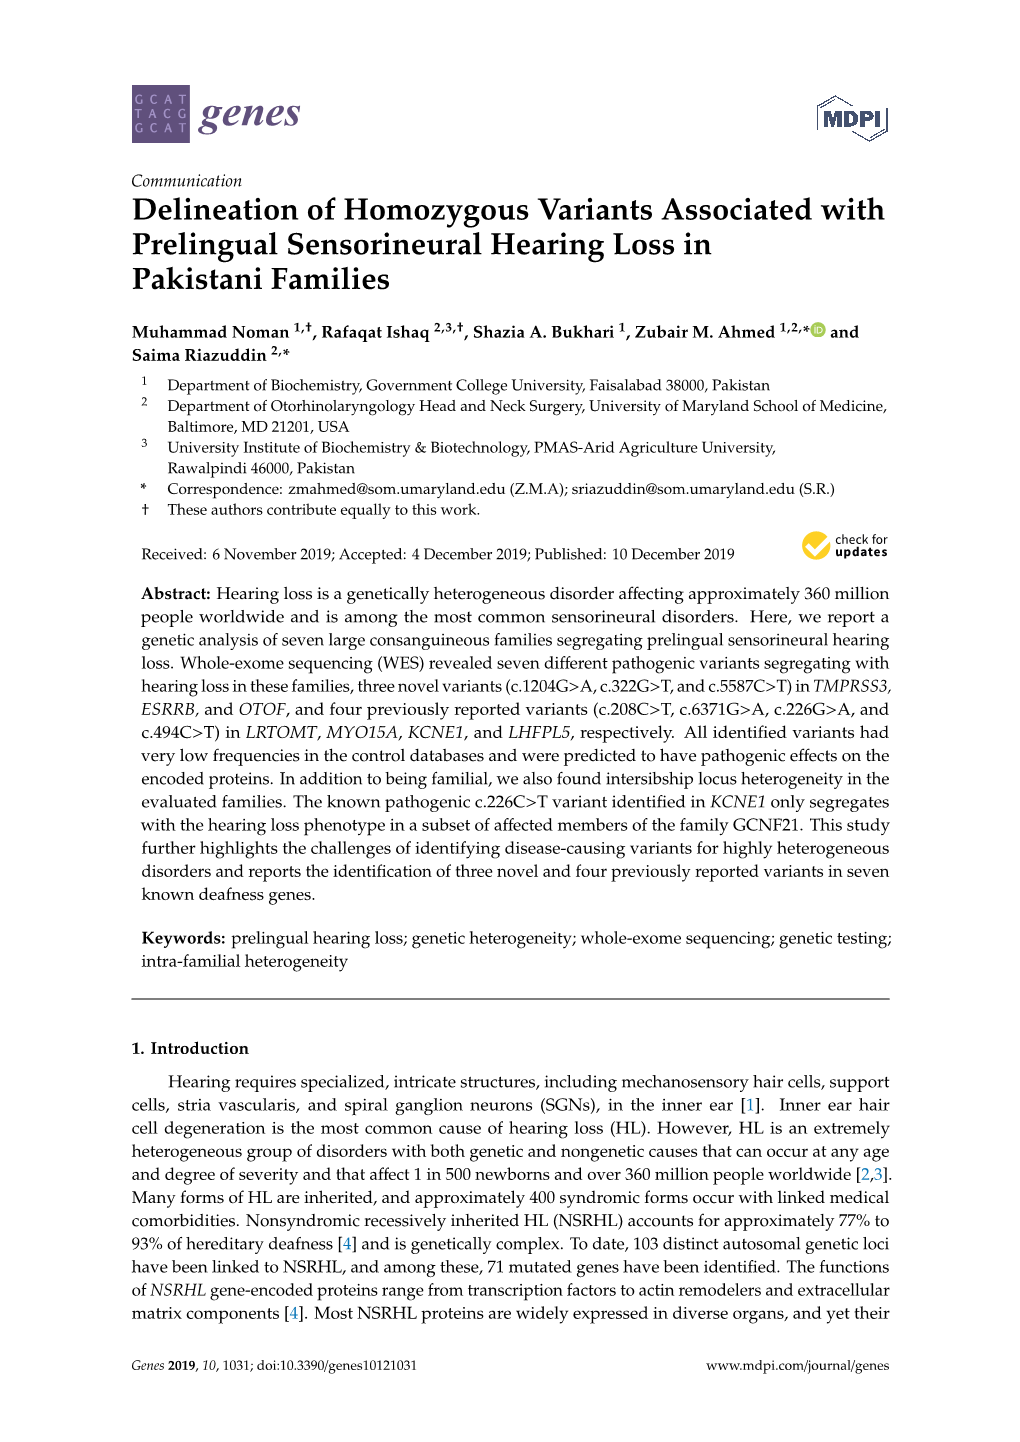 Delineation of Homozygous Variants Associated with Prelingual Sensorineural Hearing Loss in Pakistani Families